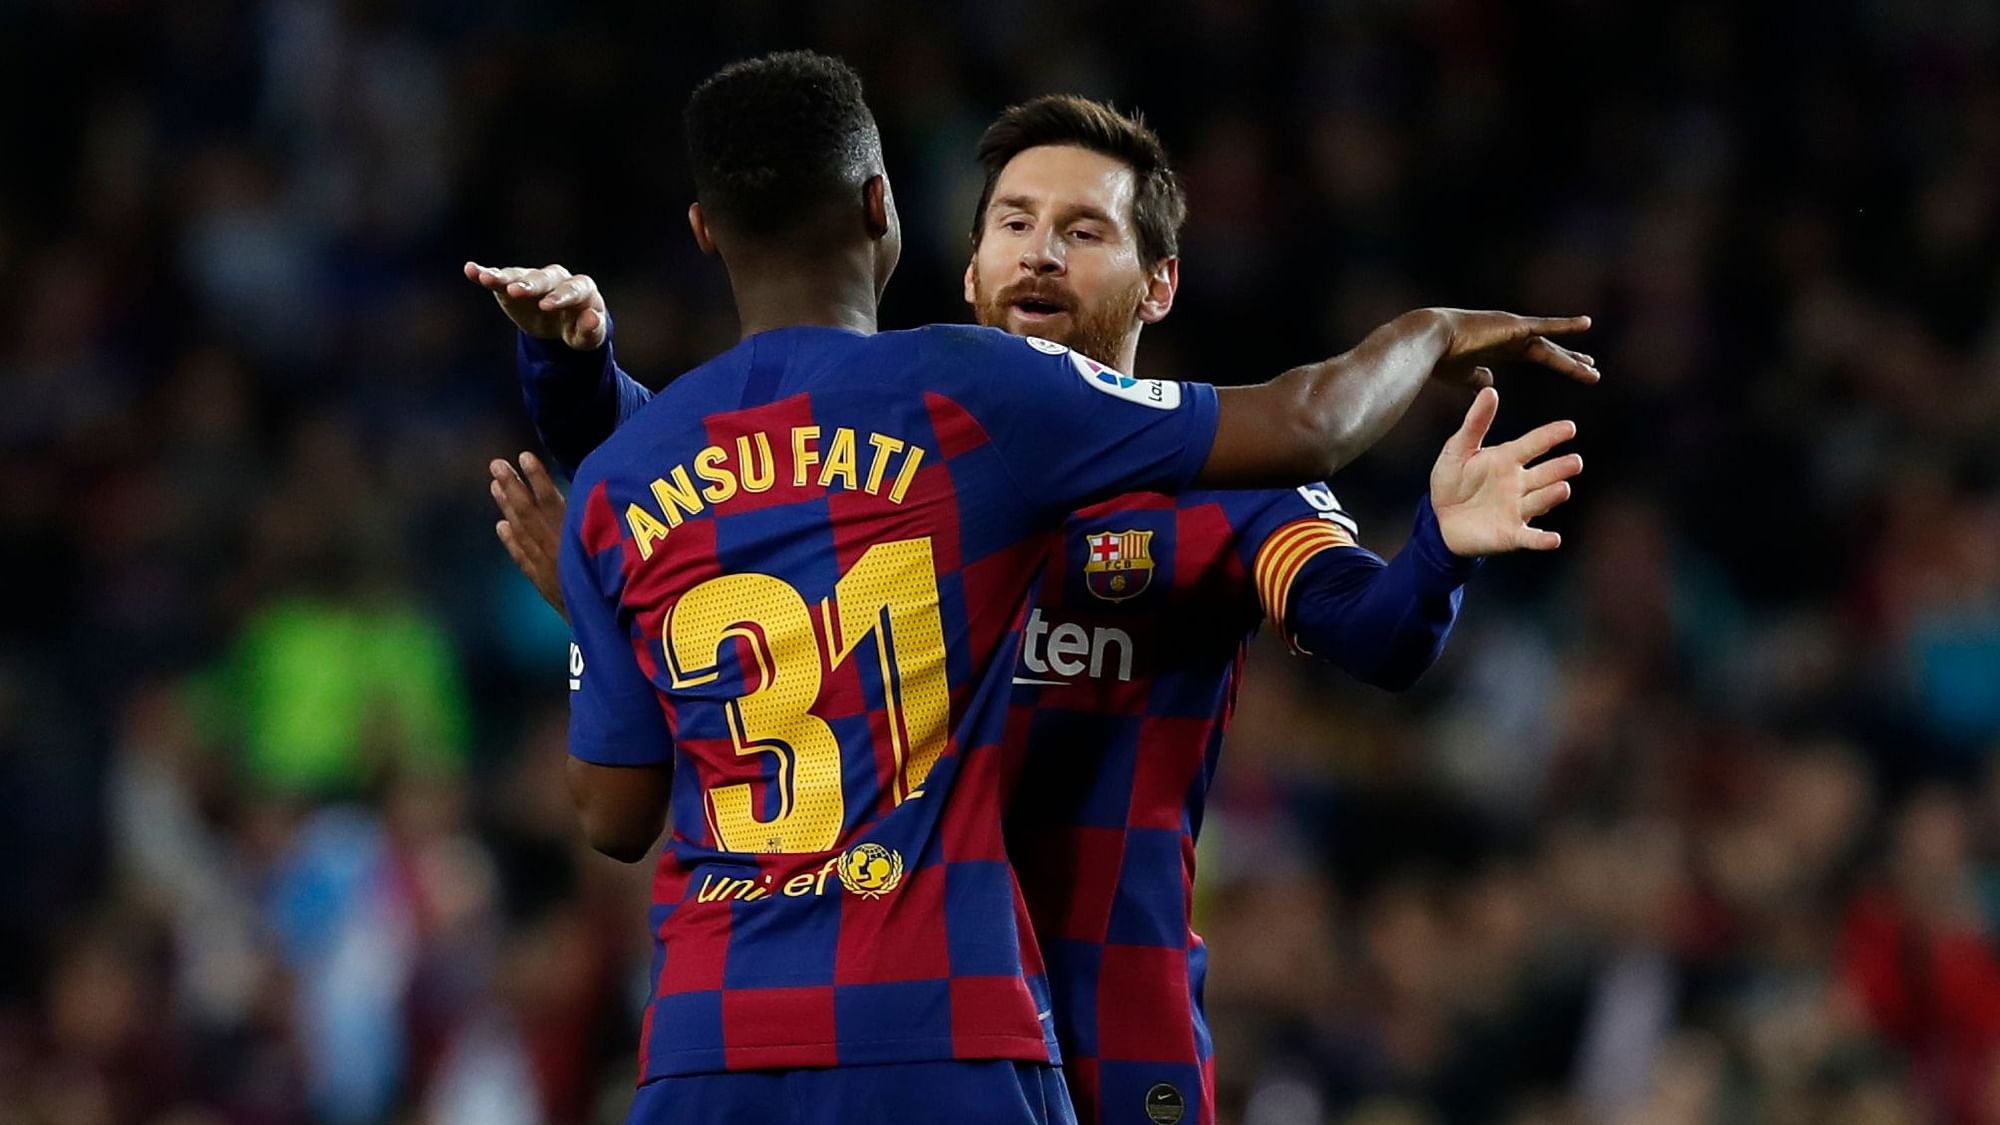 Ansu Fati became the youngest player ever to score a brace in La Liga by capitalising on two brilliant Lionel Messi assists to give Barcelona a 2-1 victory over Levante.